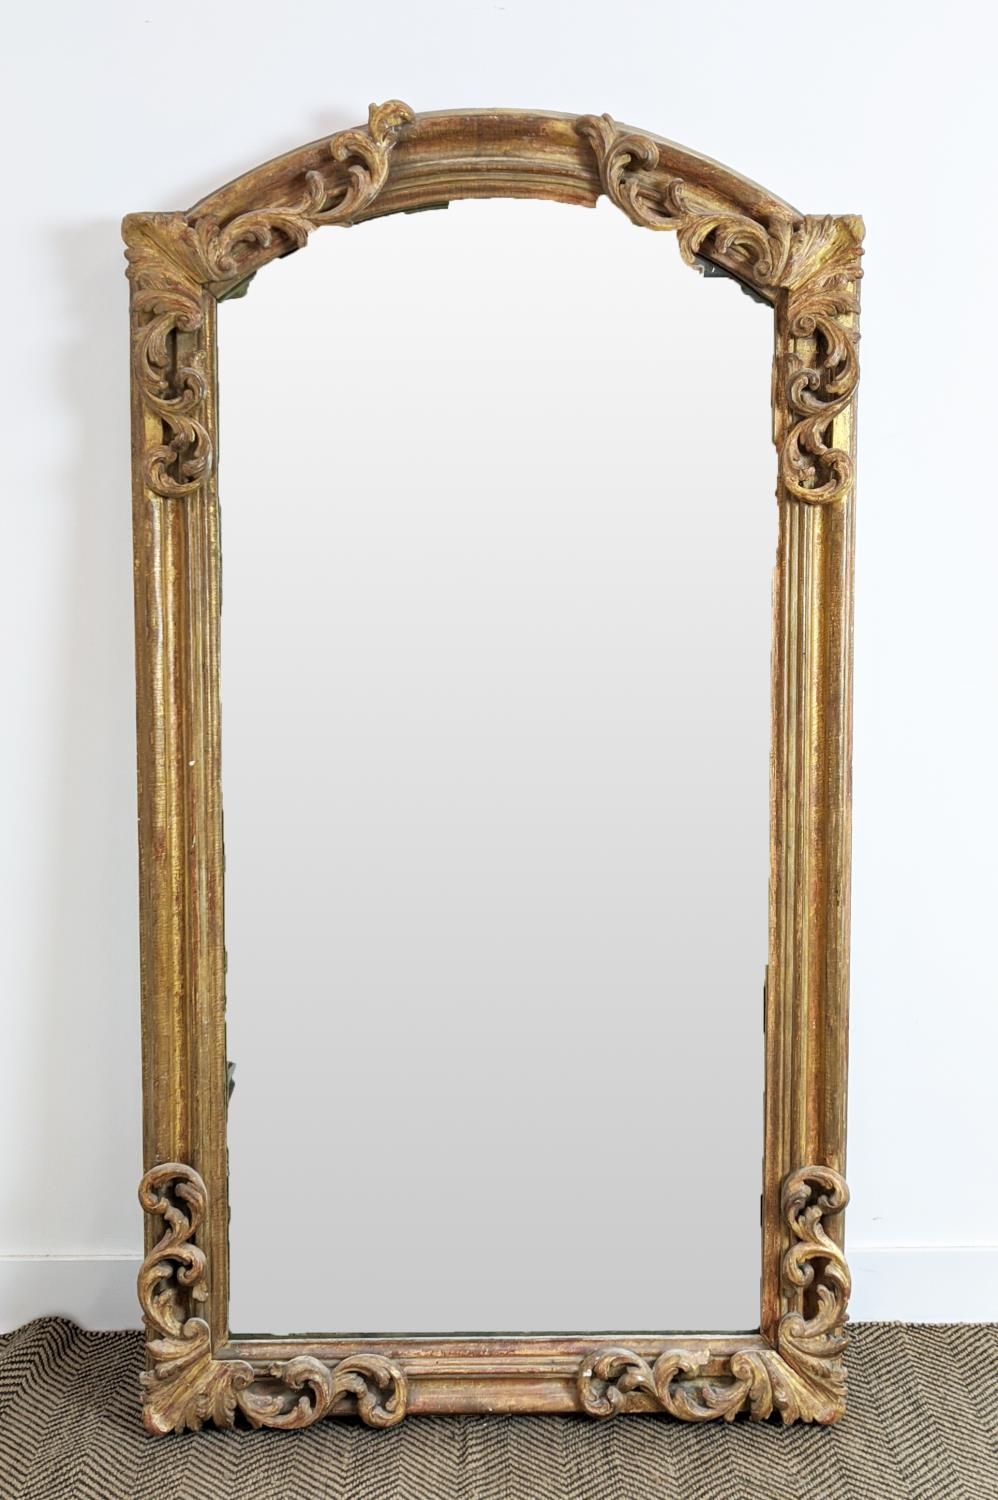 WALL MIRROR, early 19th century Continental giltwood and gesso with arched foliate scrolling frame - Image 4 of 12